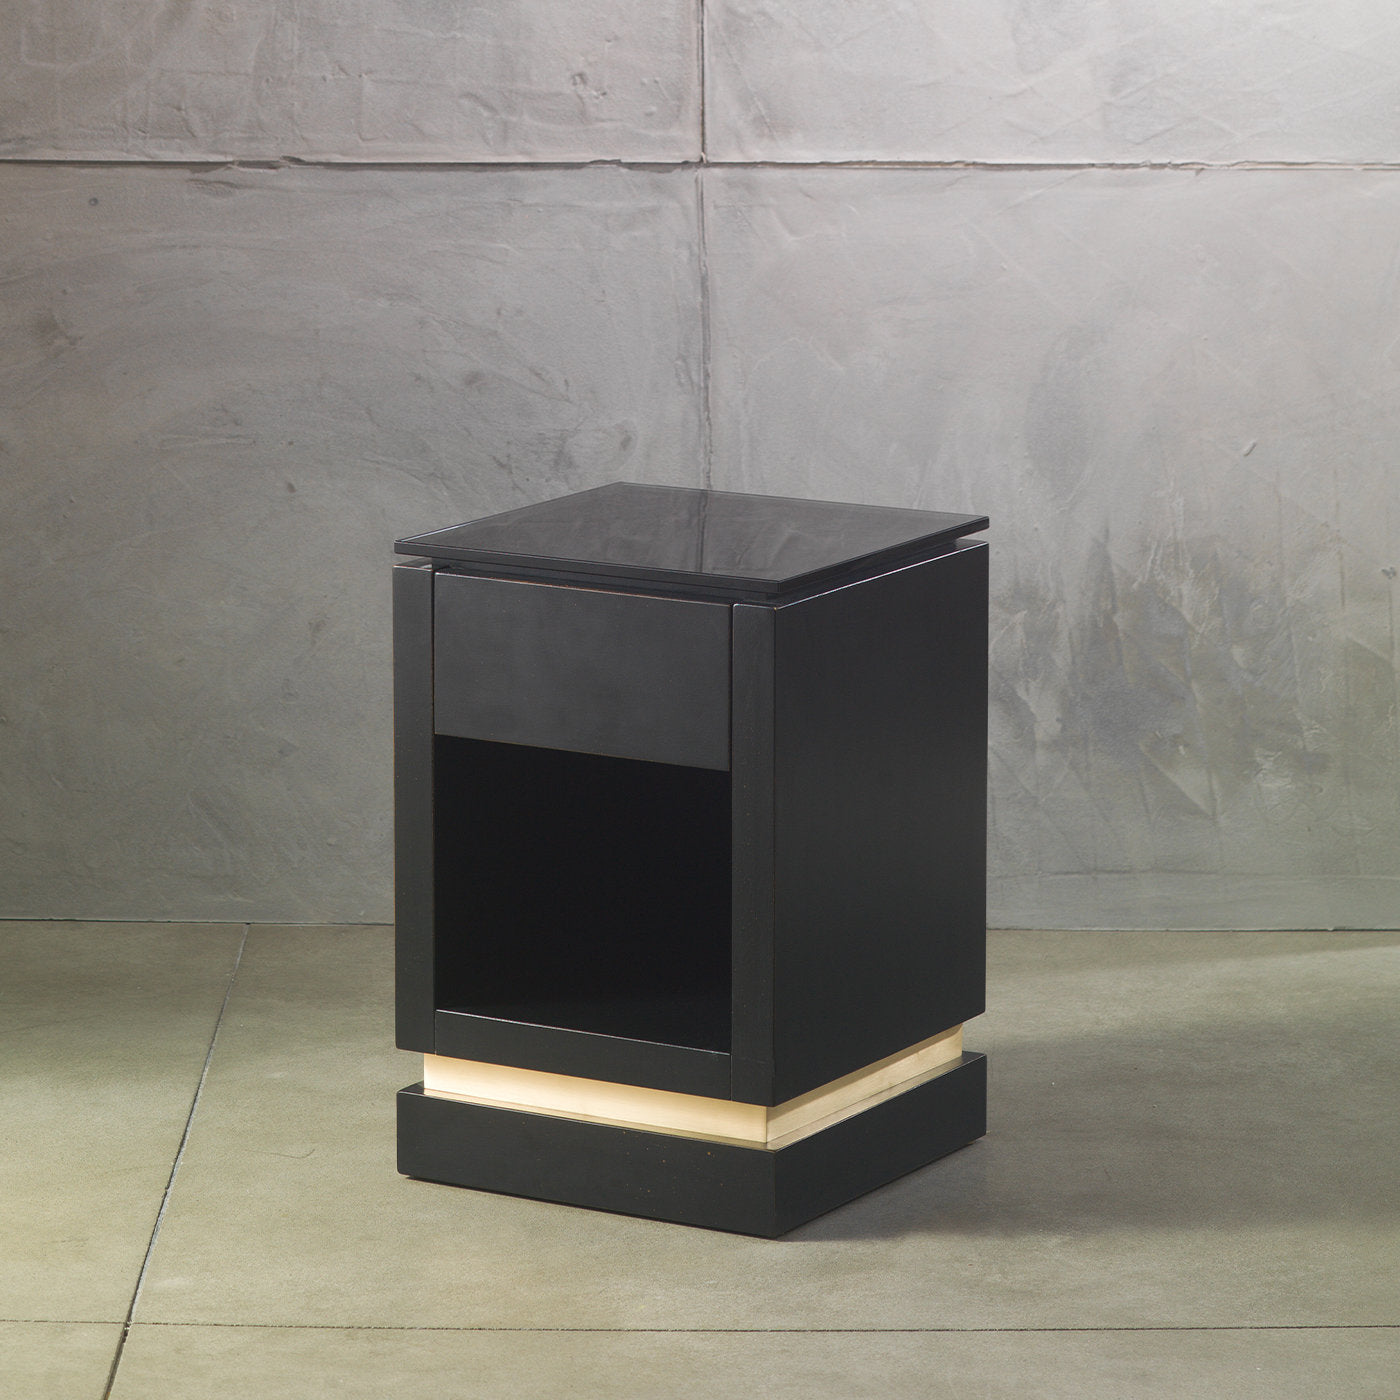 Cube Bedside Table by Filippo Montaina - Alternative view 1